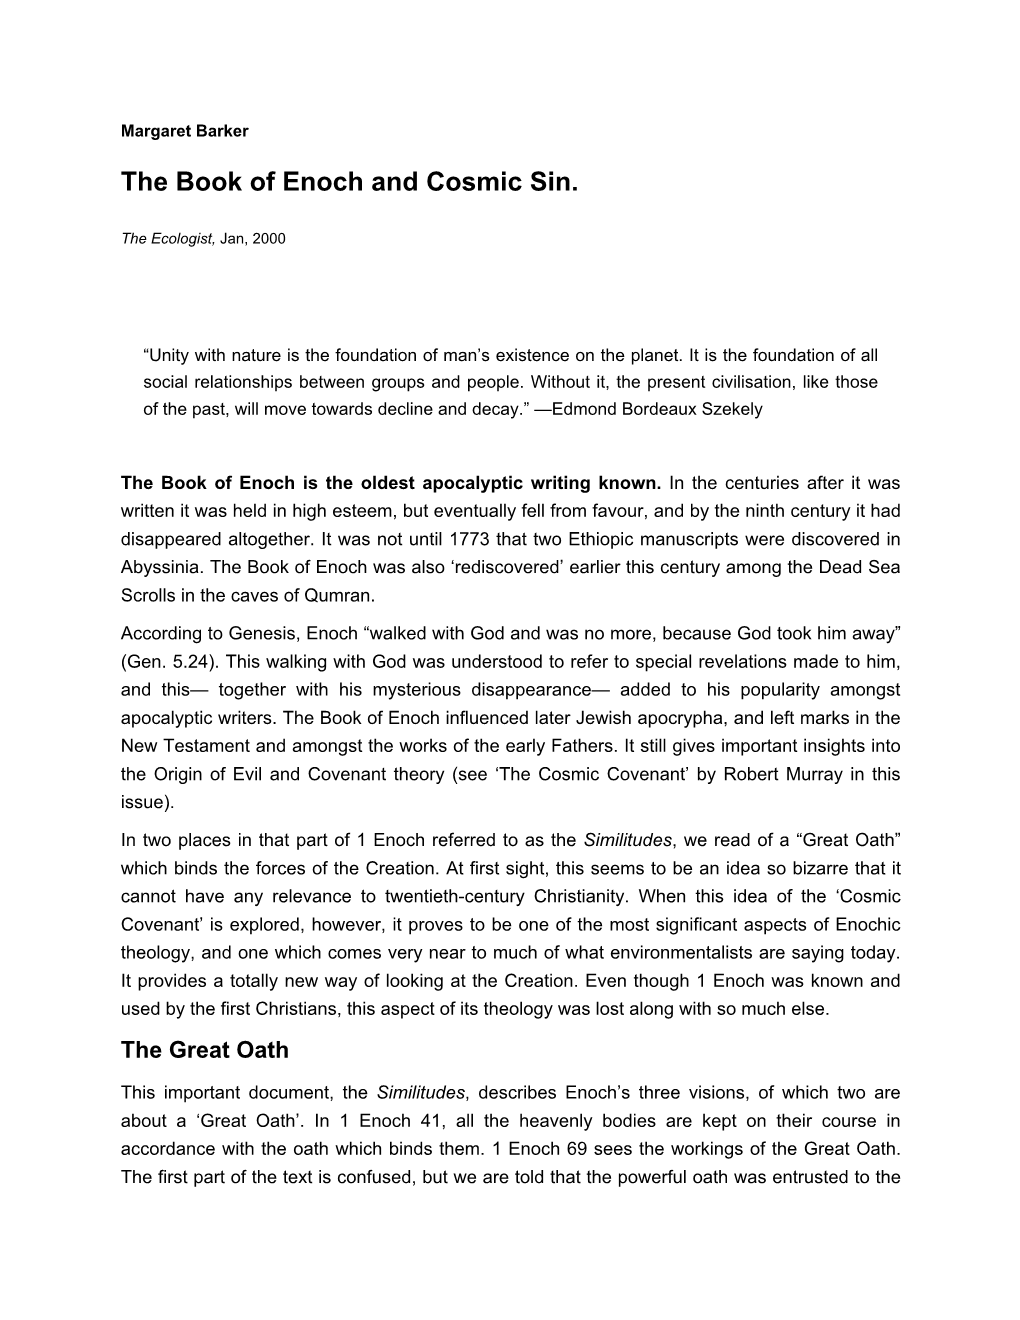 The Book of Enoch and Cosmic Sin